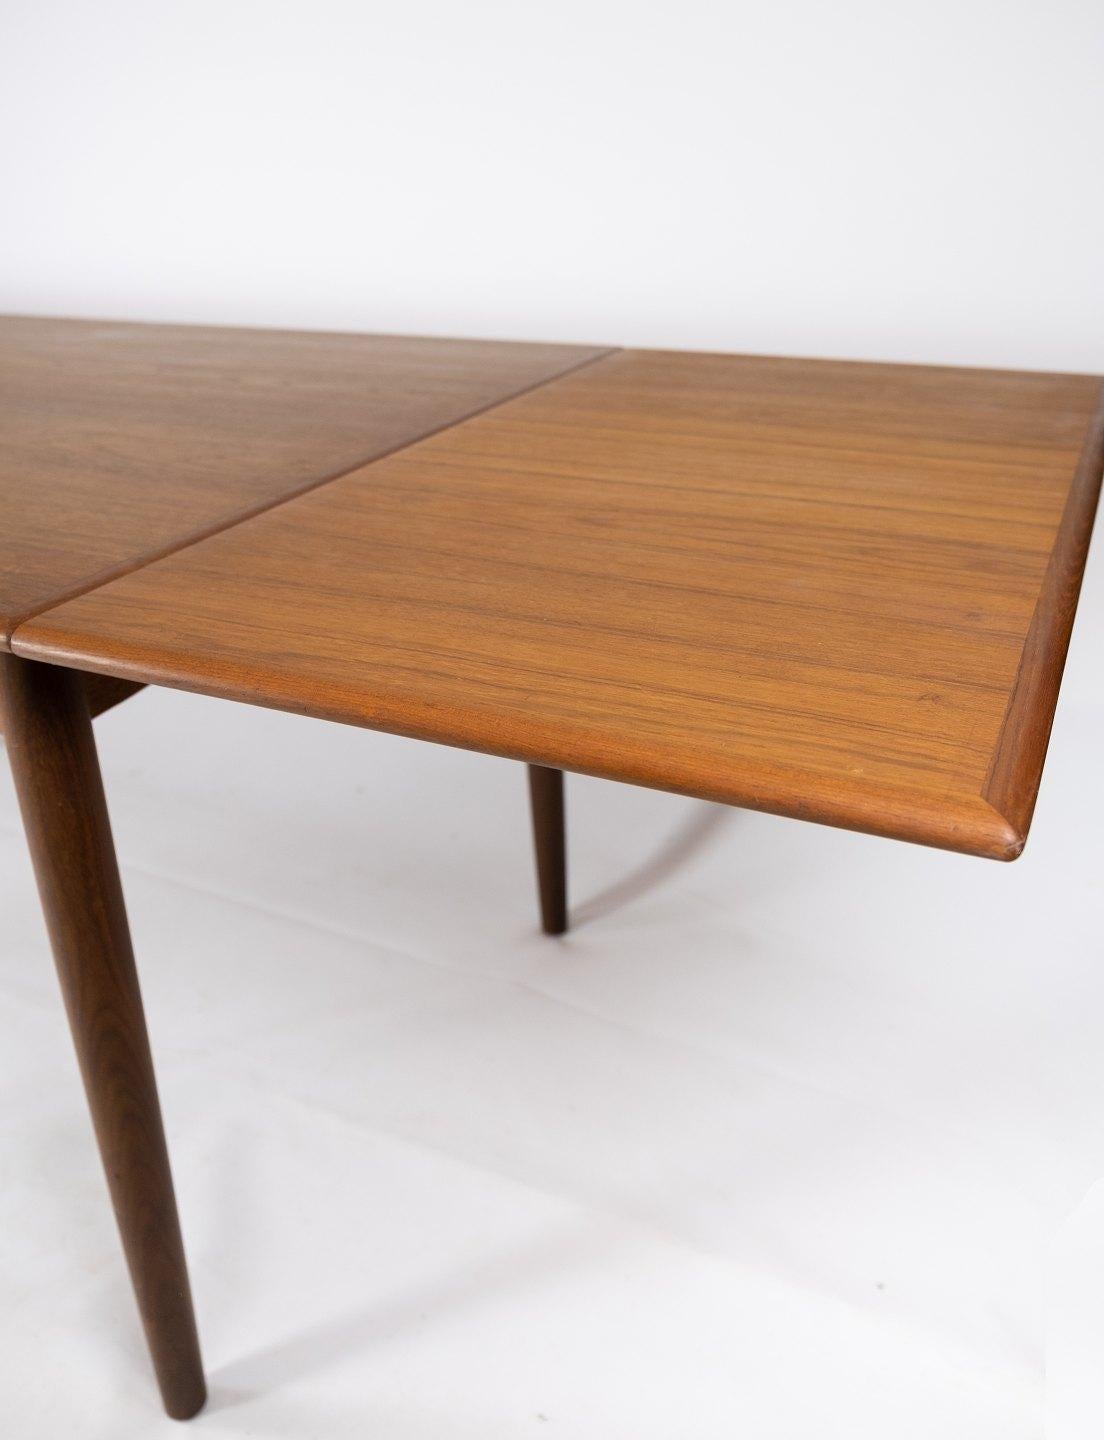 Mid-20th Century Dining Table Made In Teak With Extensions, Danish Design From 1960s For Sale